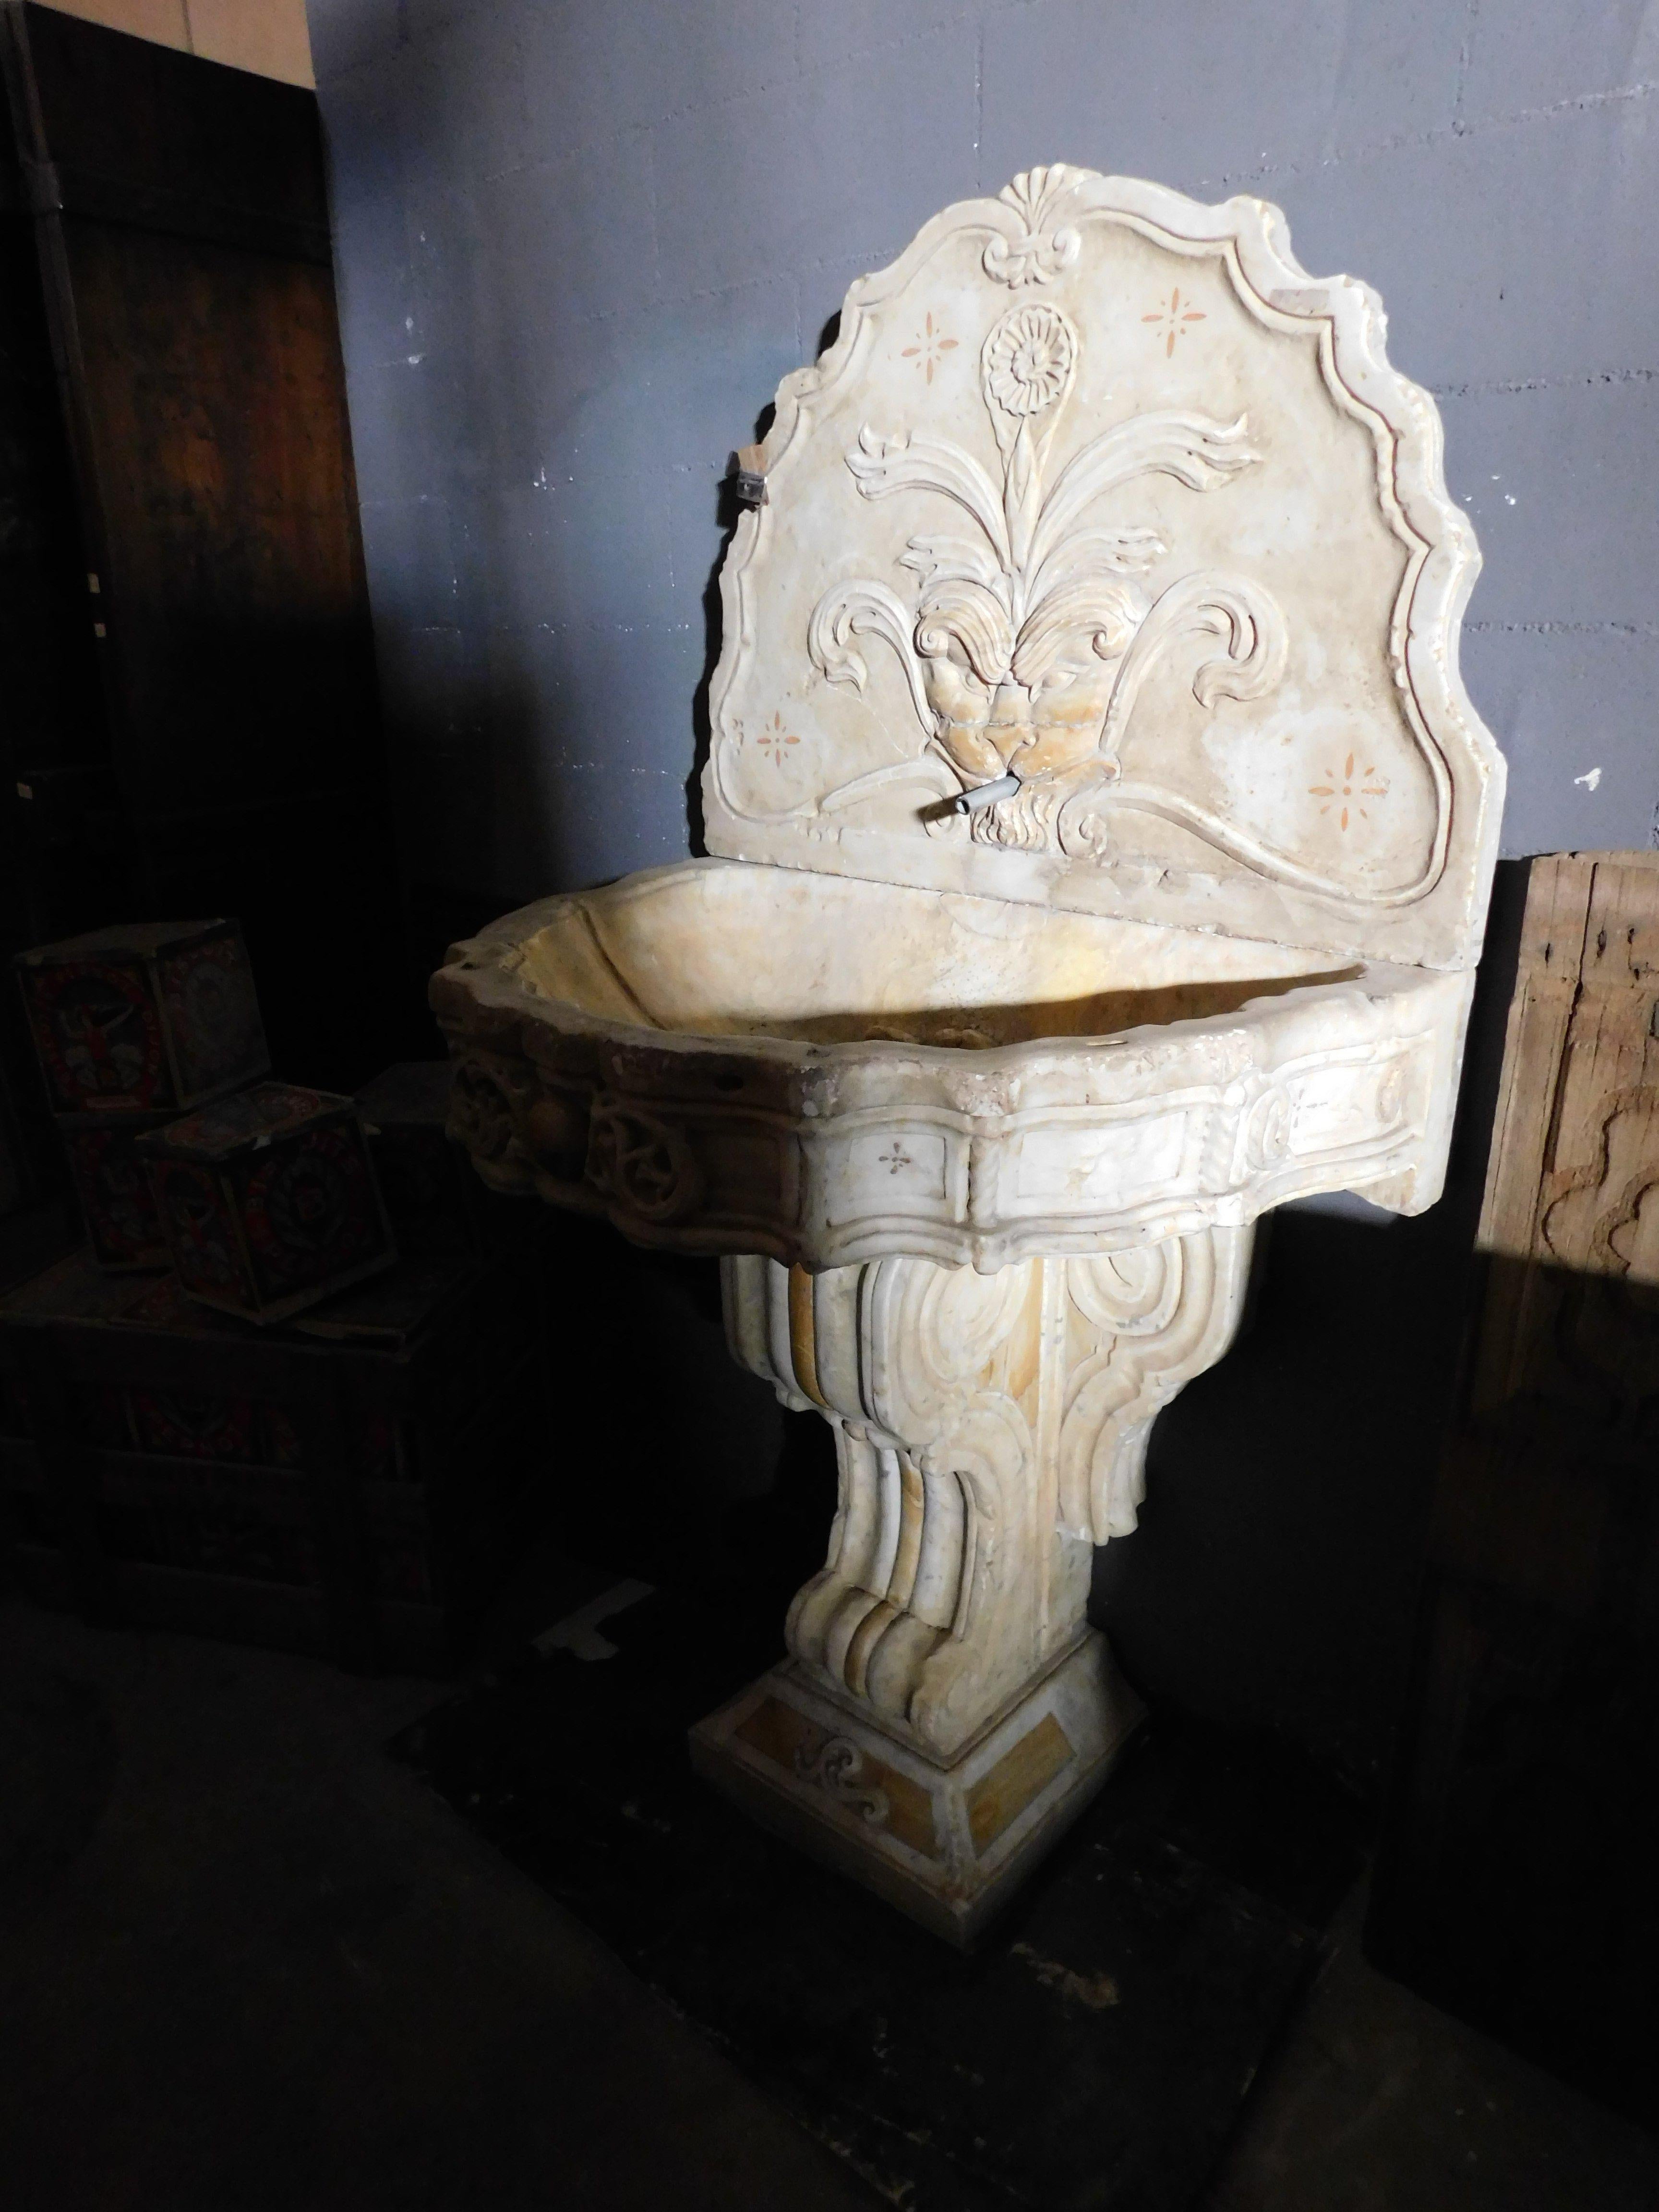 Ancient Fountain in Carved and Inlaid Marble, 16th/17th Century, from Sicily 4